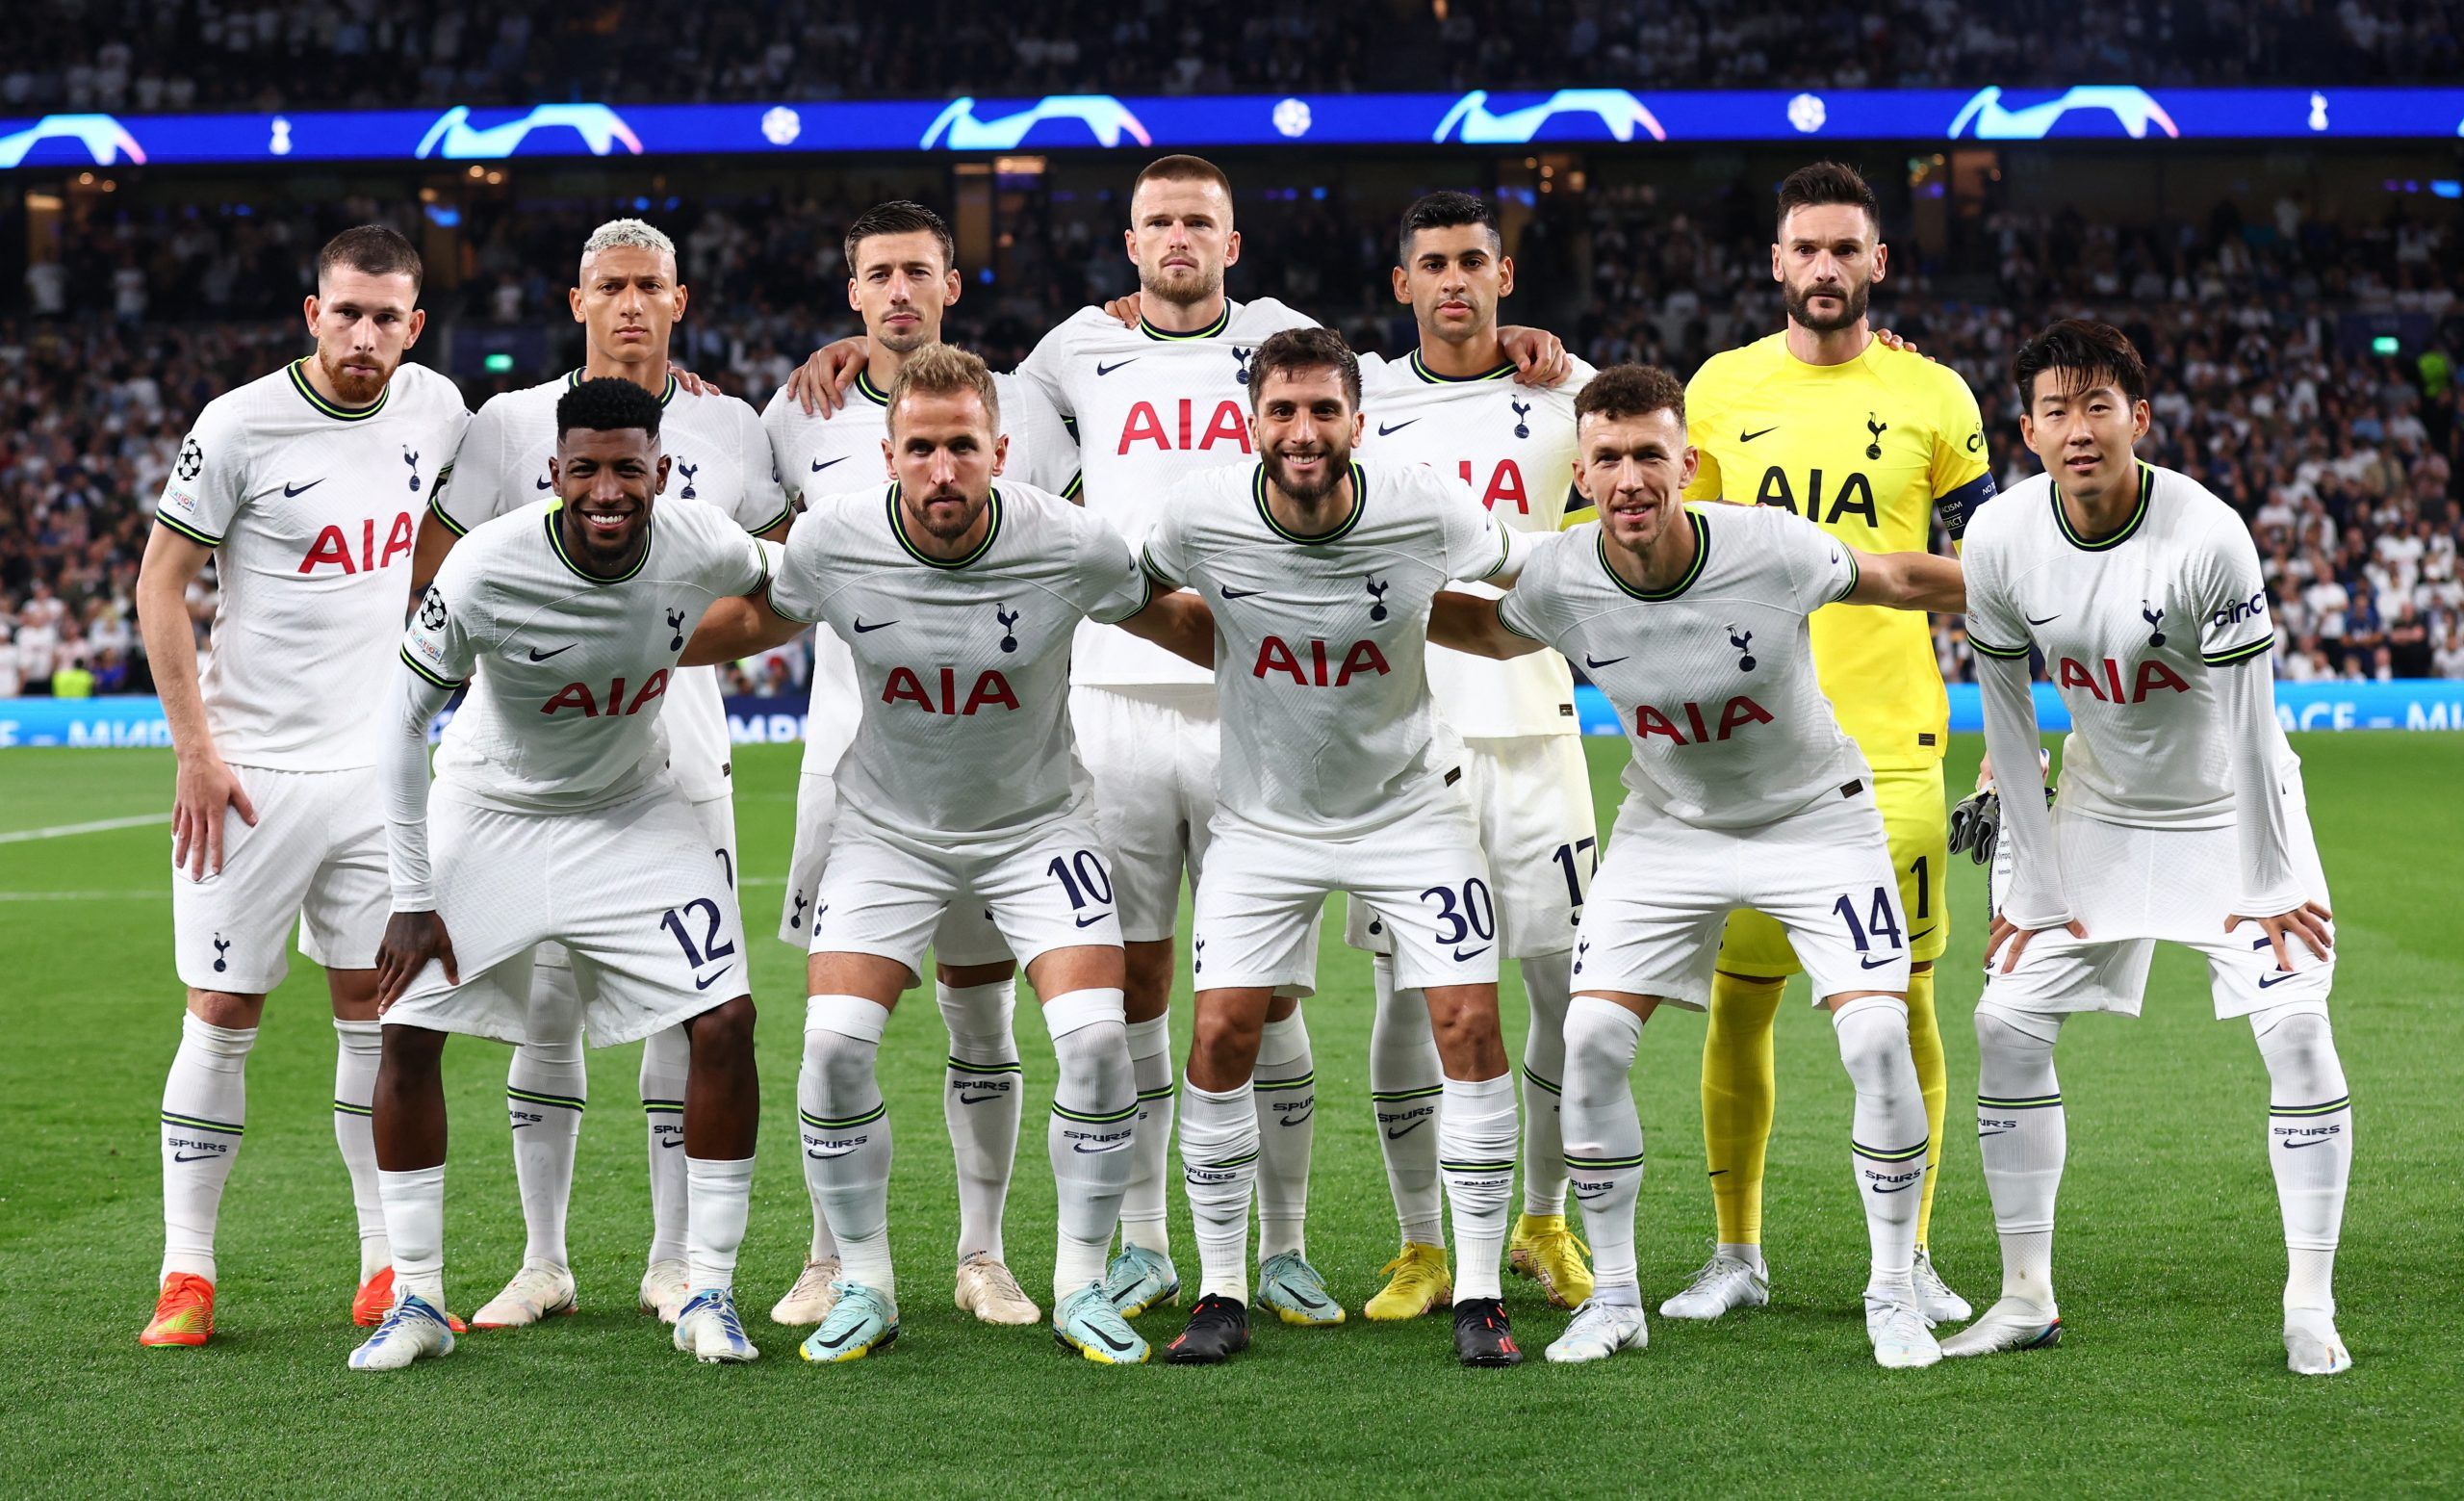 Tottenham Hotspur players pose for a team group photo before the match vs Marseille